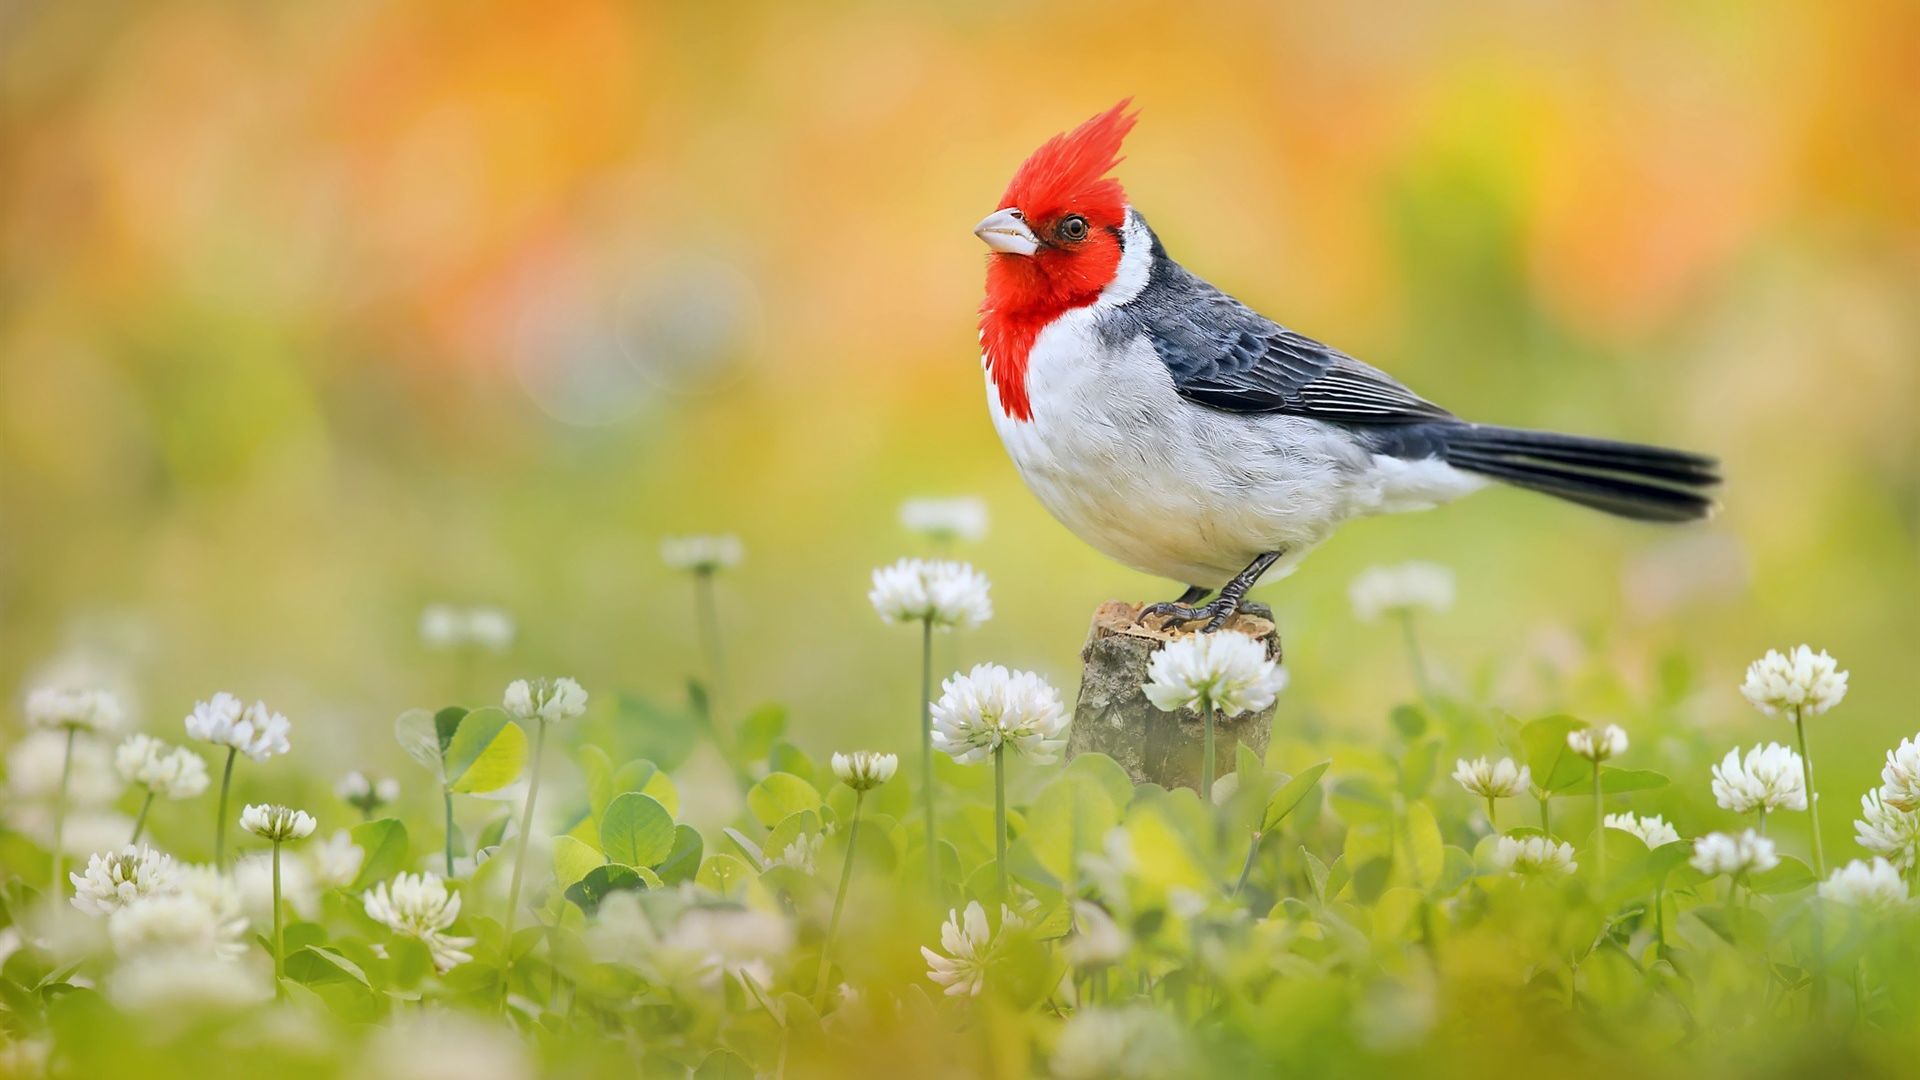 Desktop Wallpaper Red Crested Cardinal, Cardinal, Bird, Meadow, HD Image, Picture, Background, Kgznpq